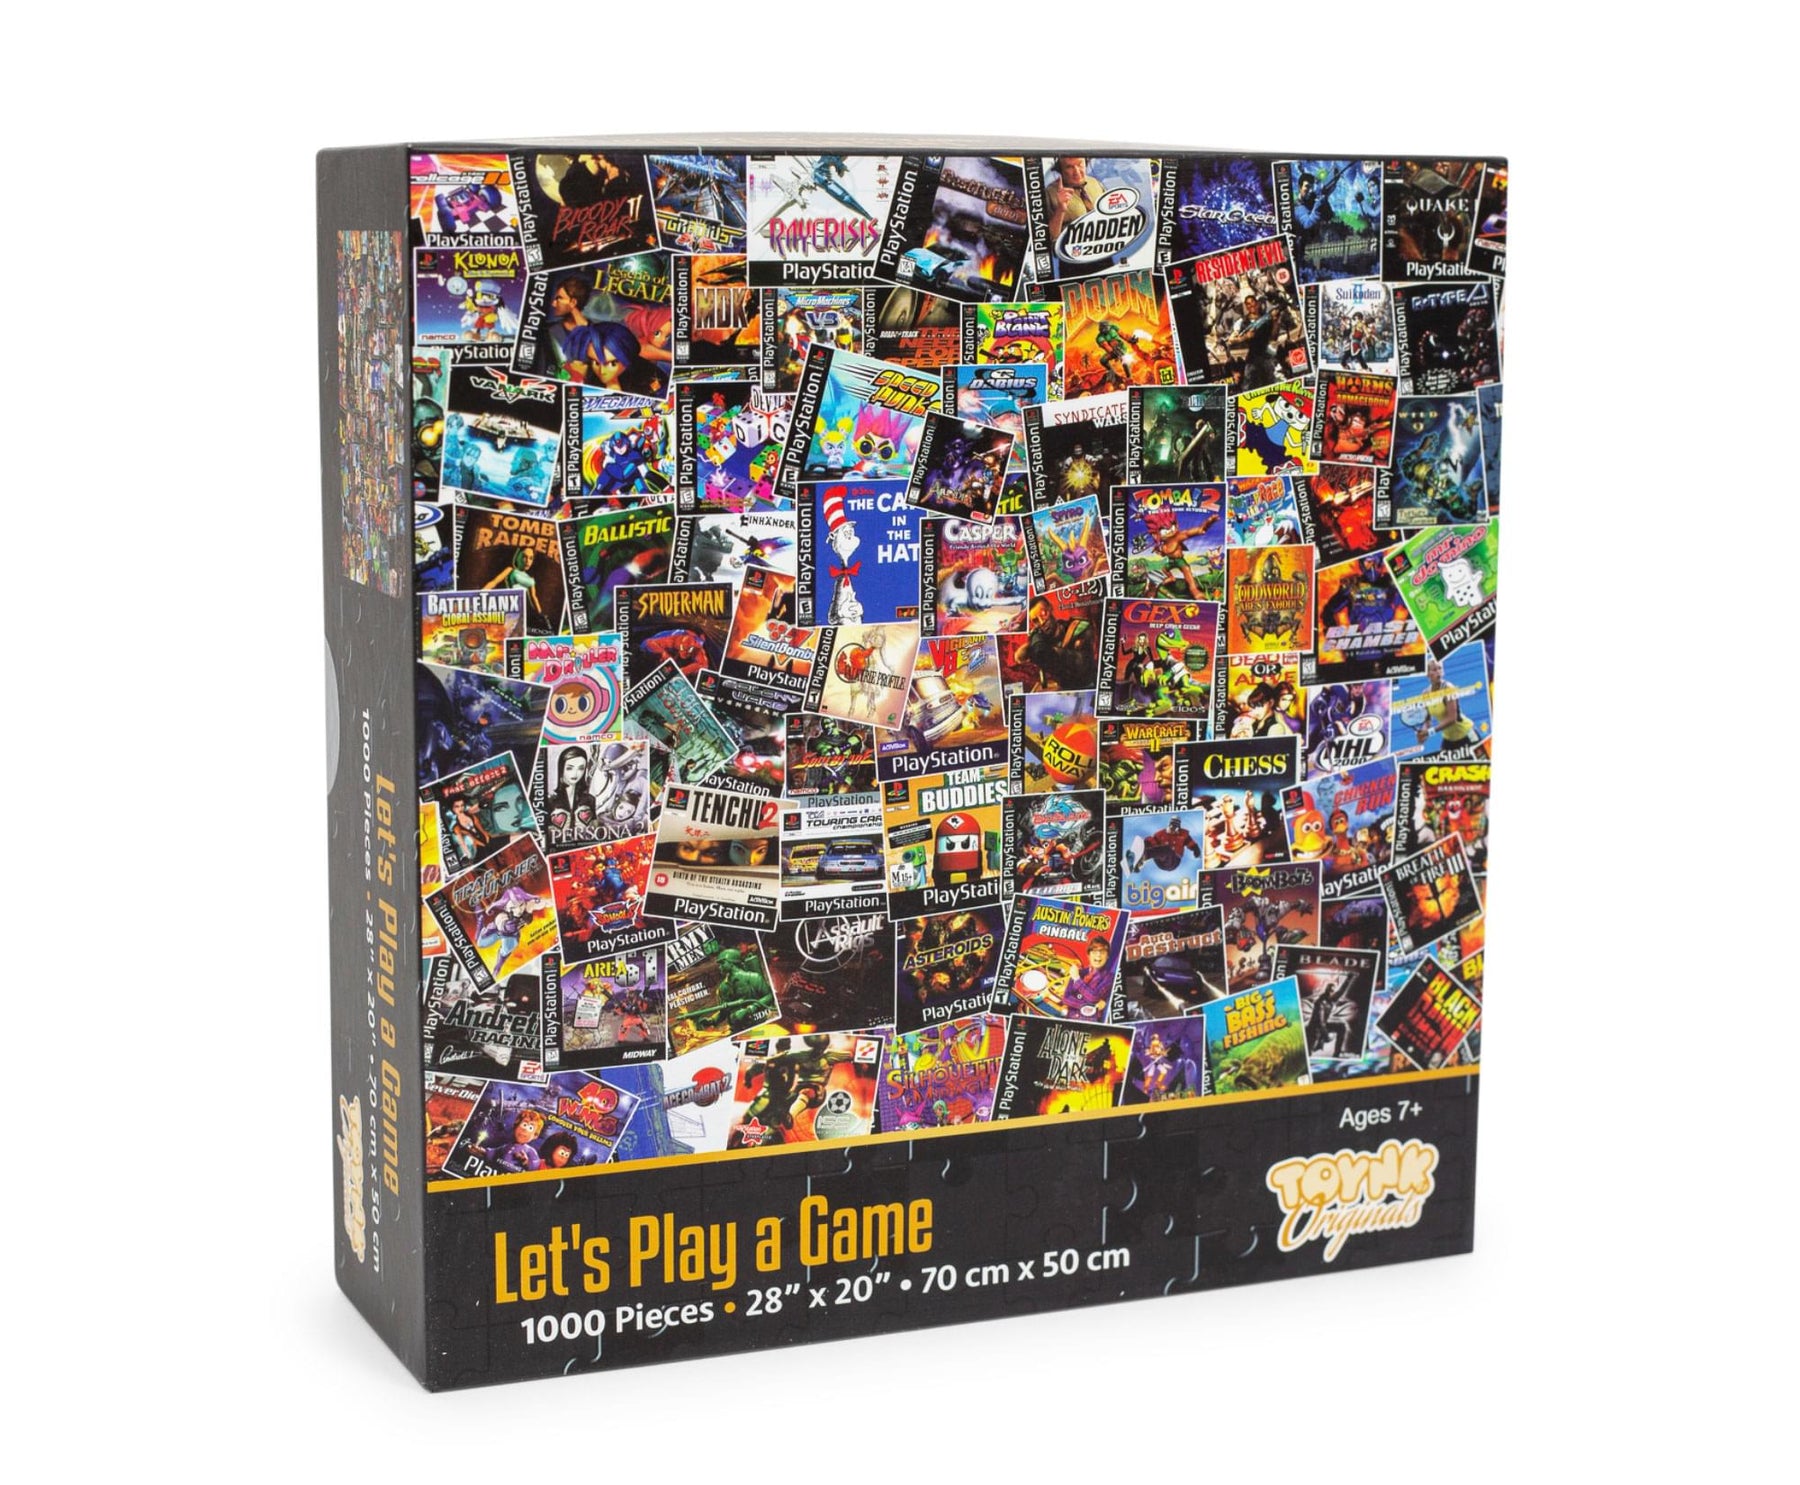 PlayStation Video Game Box Collage 1000-Piece Jigsaw Puzzle